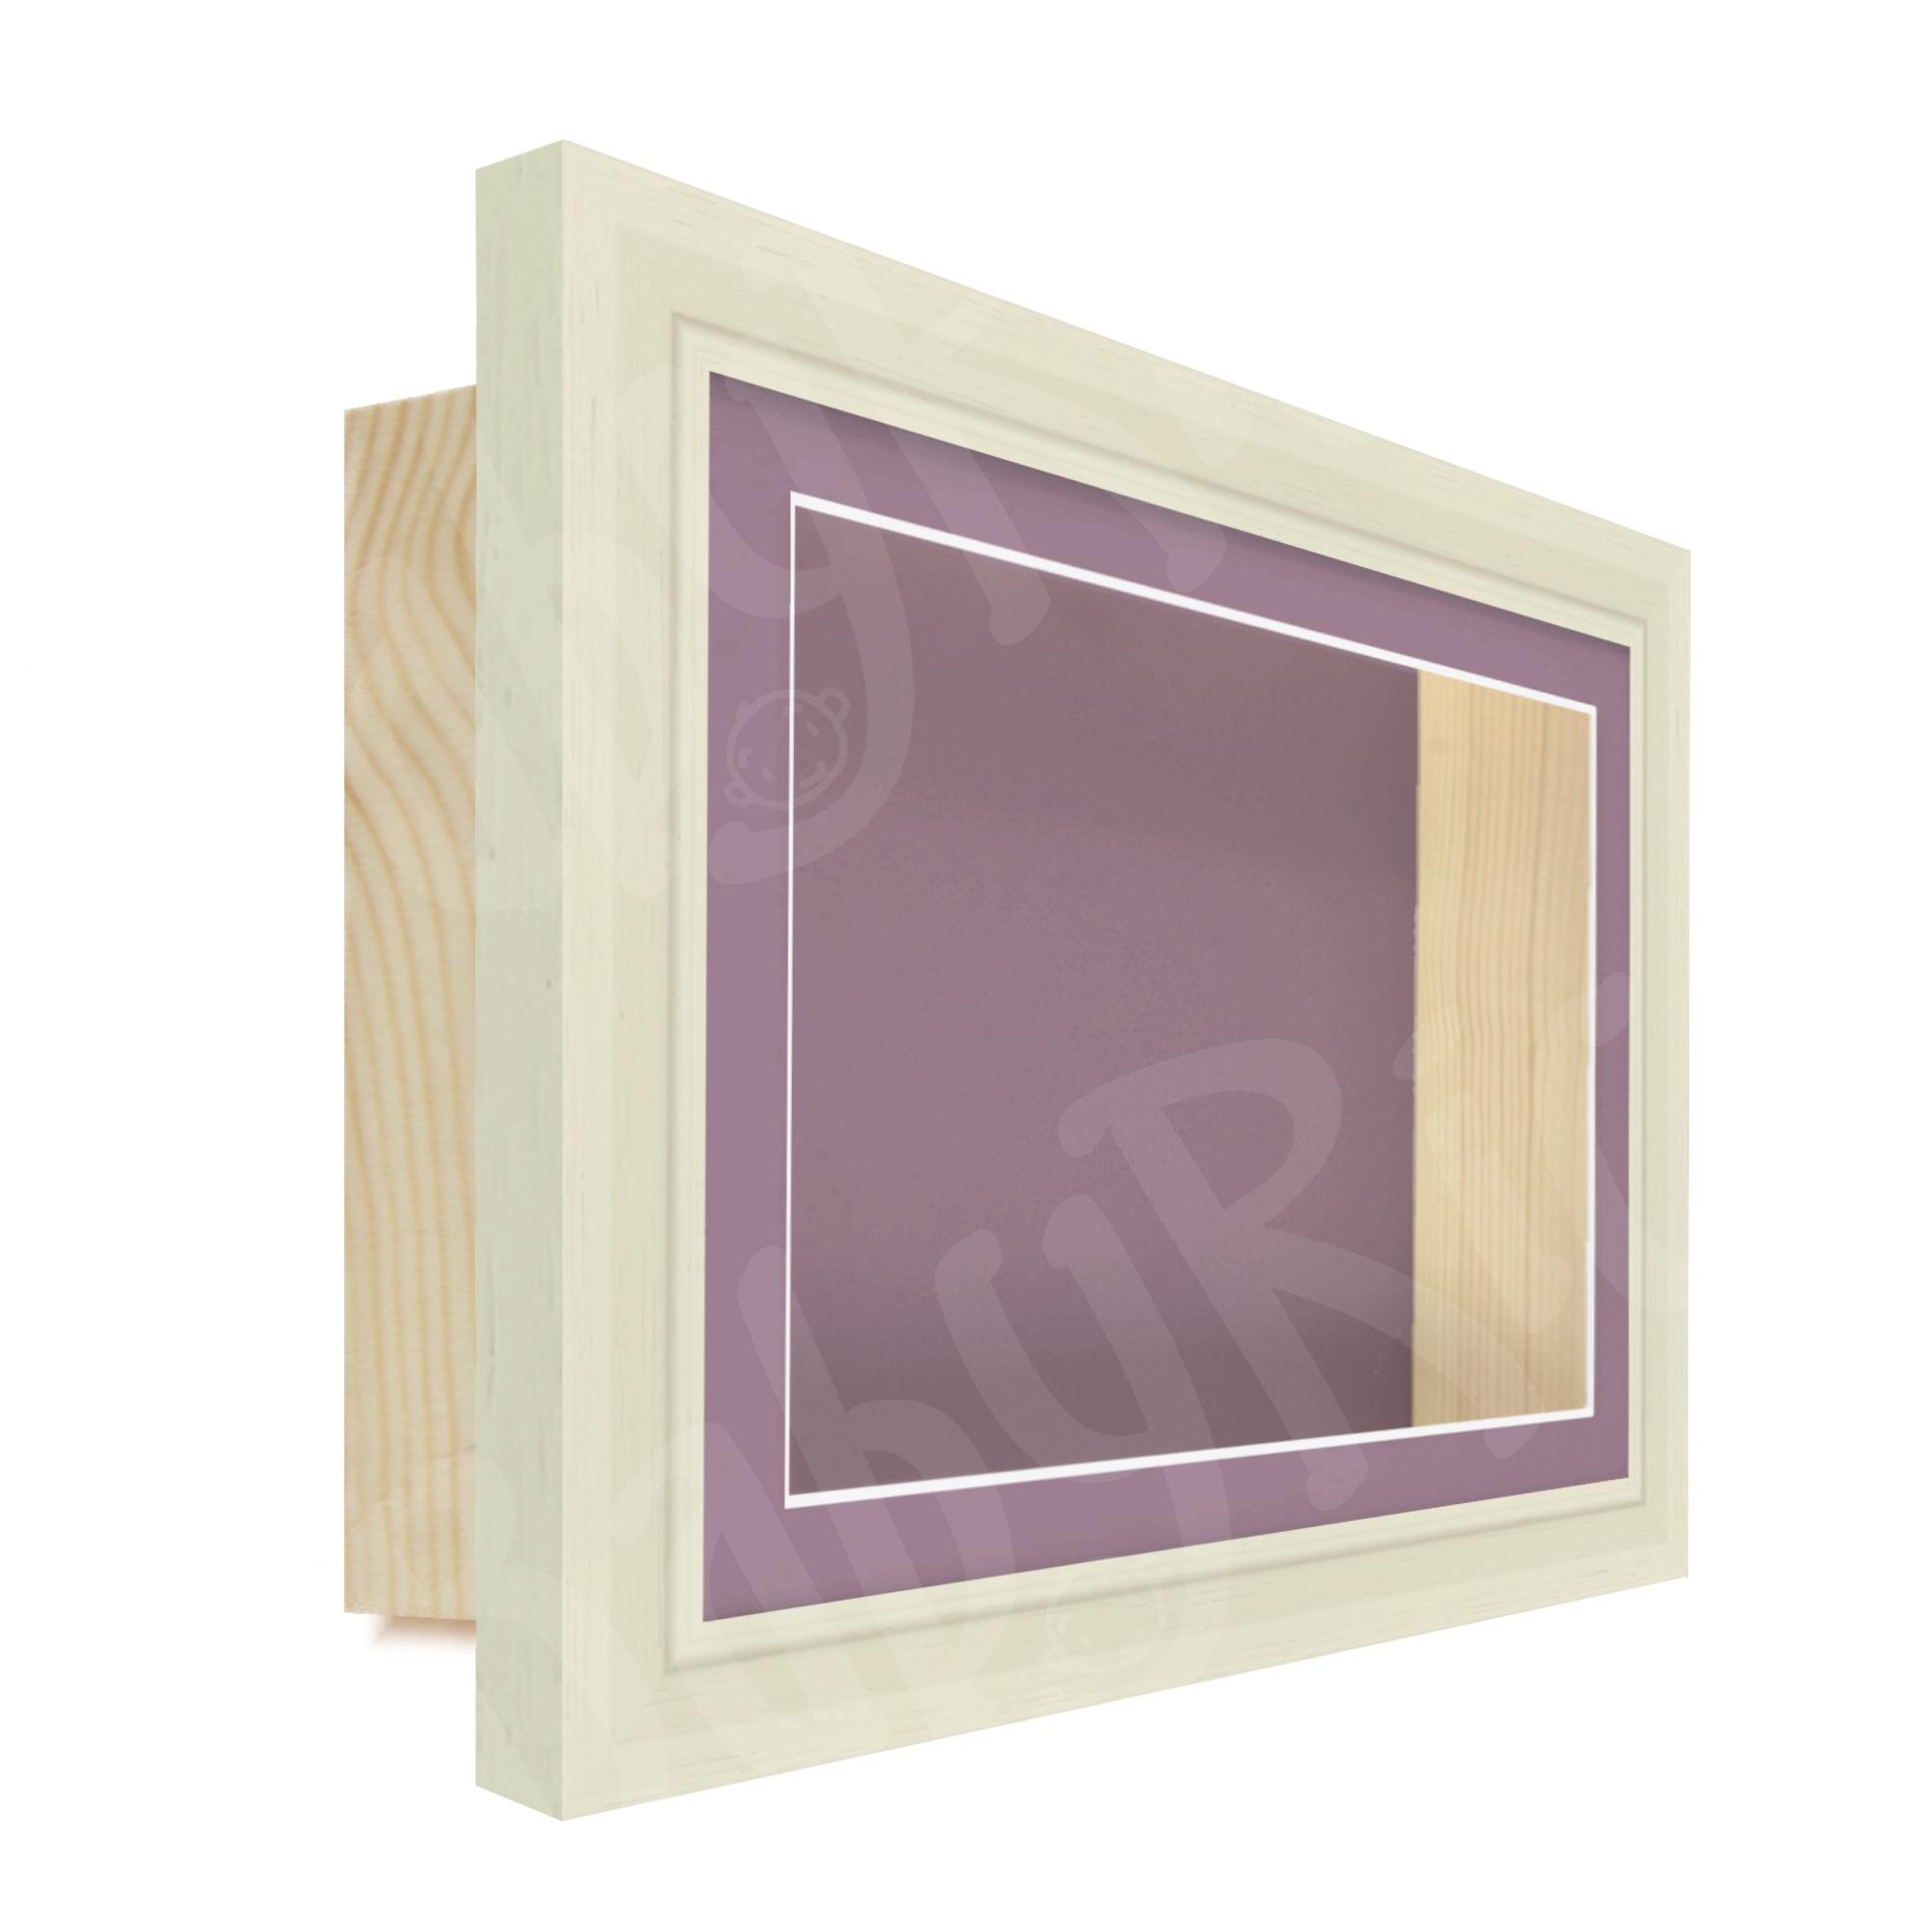 Cream Shadow Box Deep Display Frame - Violet Mount and Backing